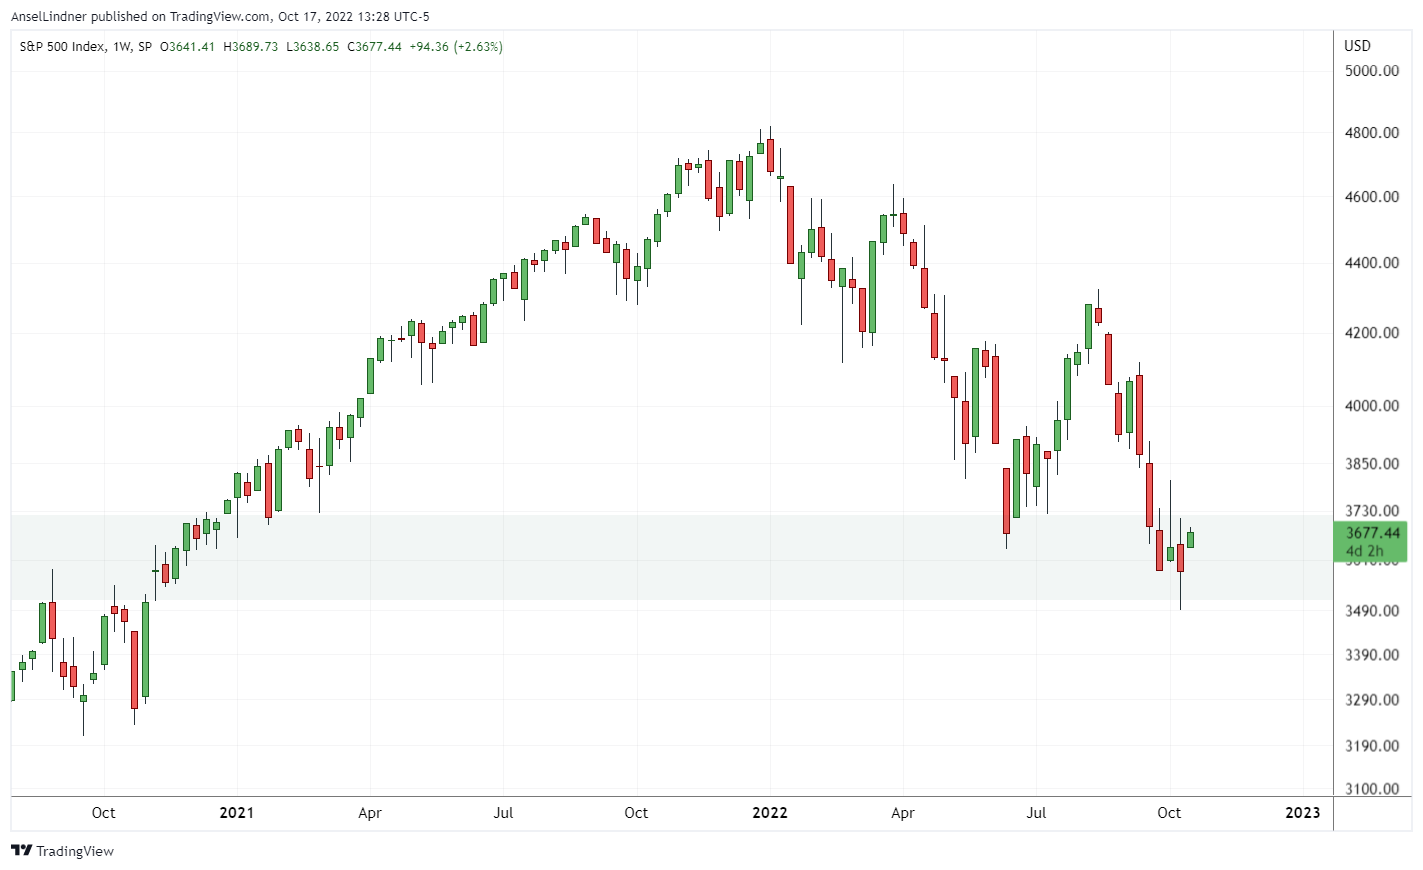 S&P 500 weekly chart on support